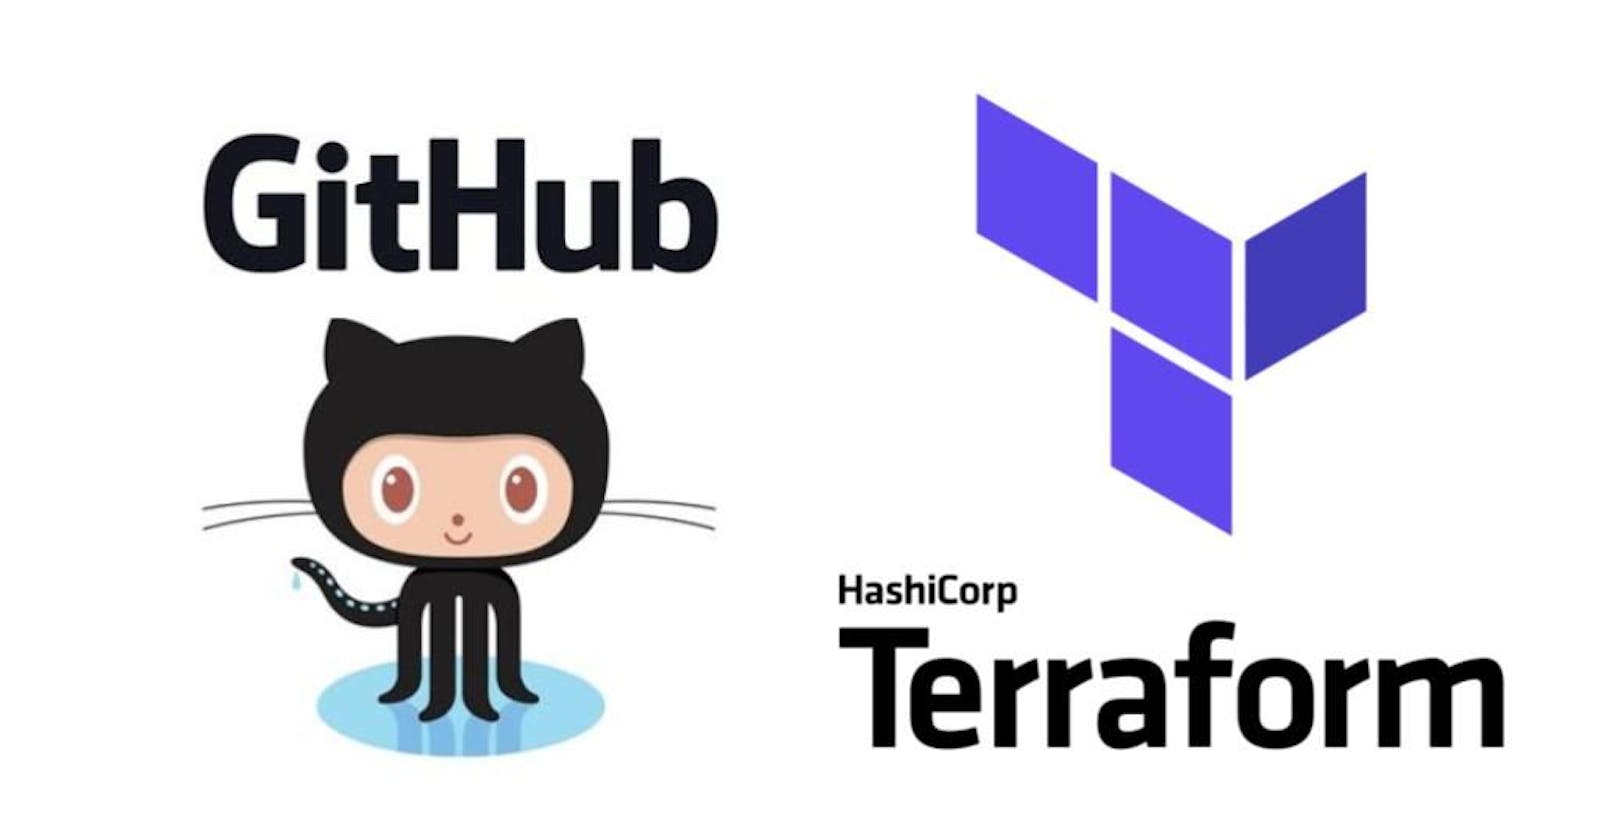 "Creating & Managing Resources with Terraform: A Guide to Using Variables, Outputs, and the GitHub Provider"